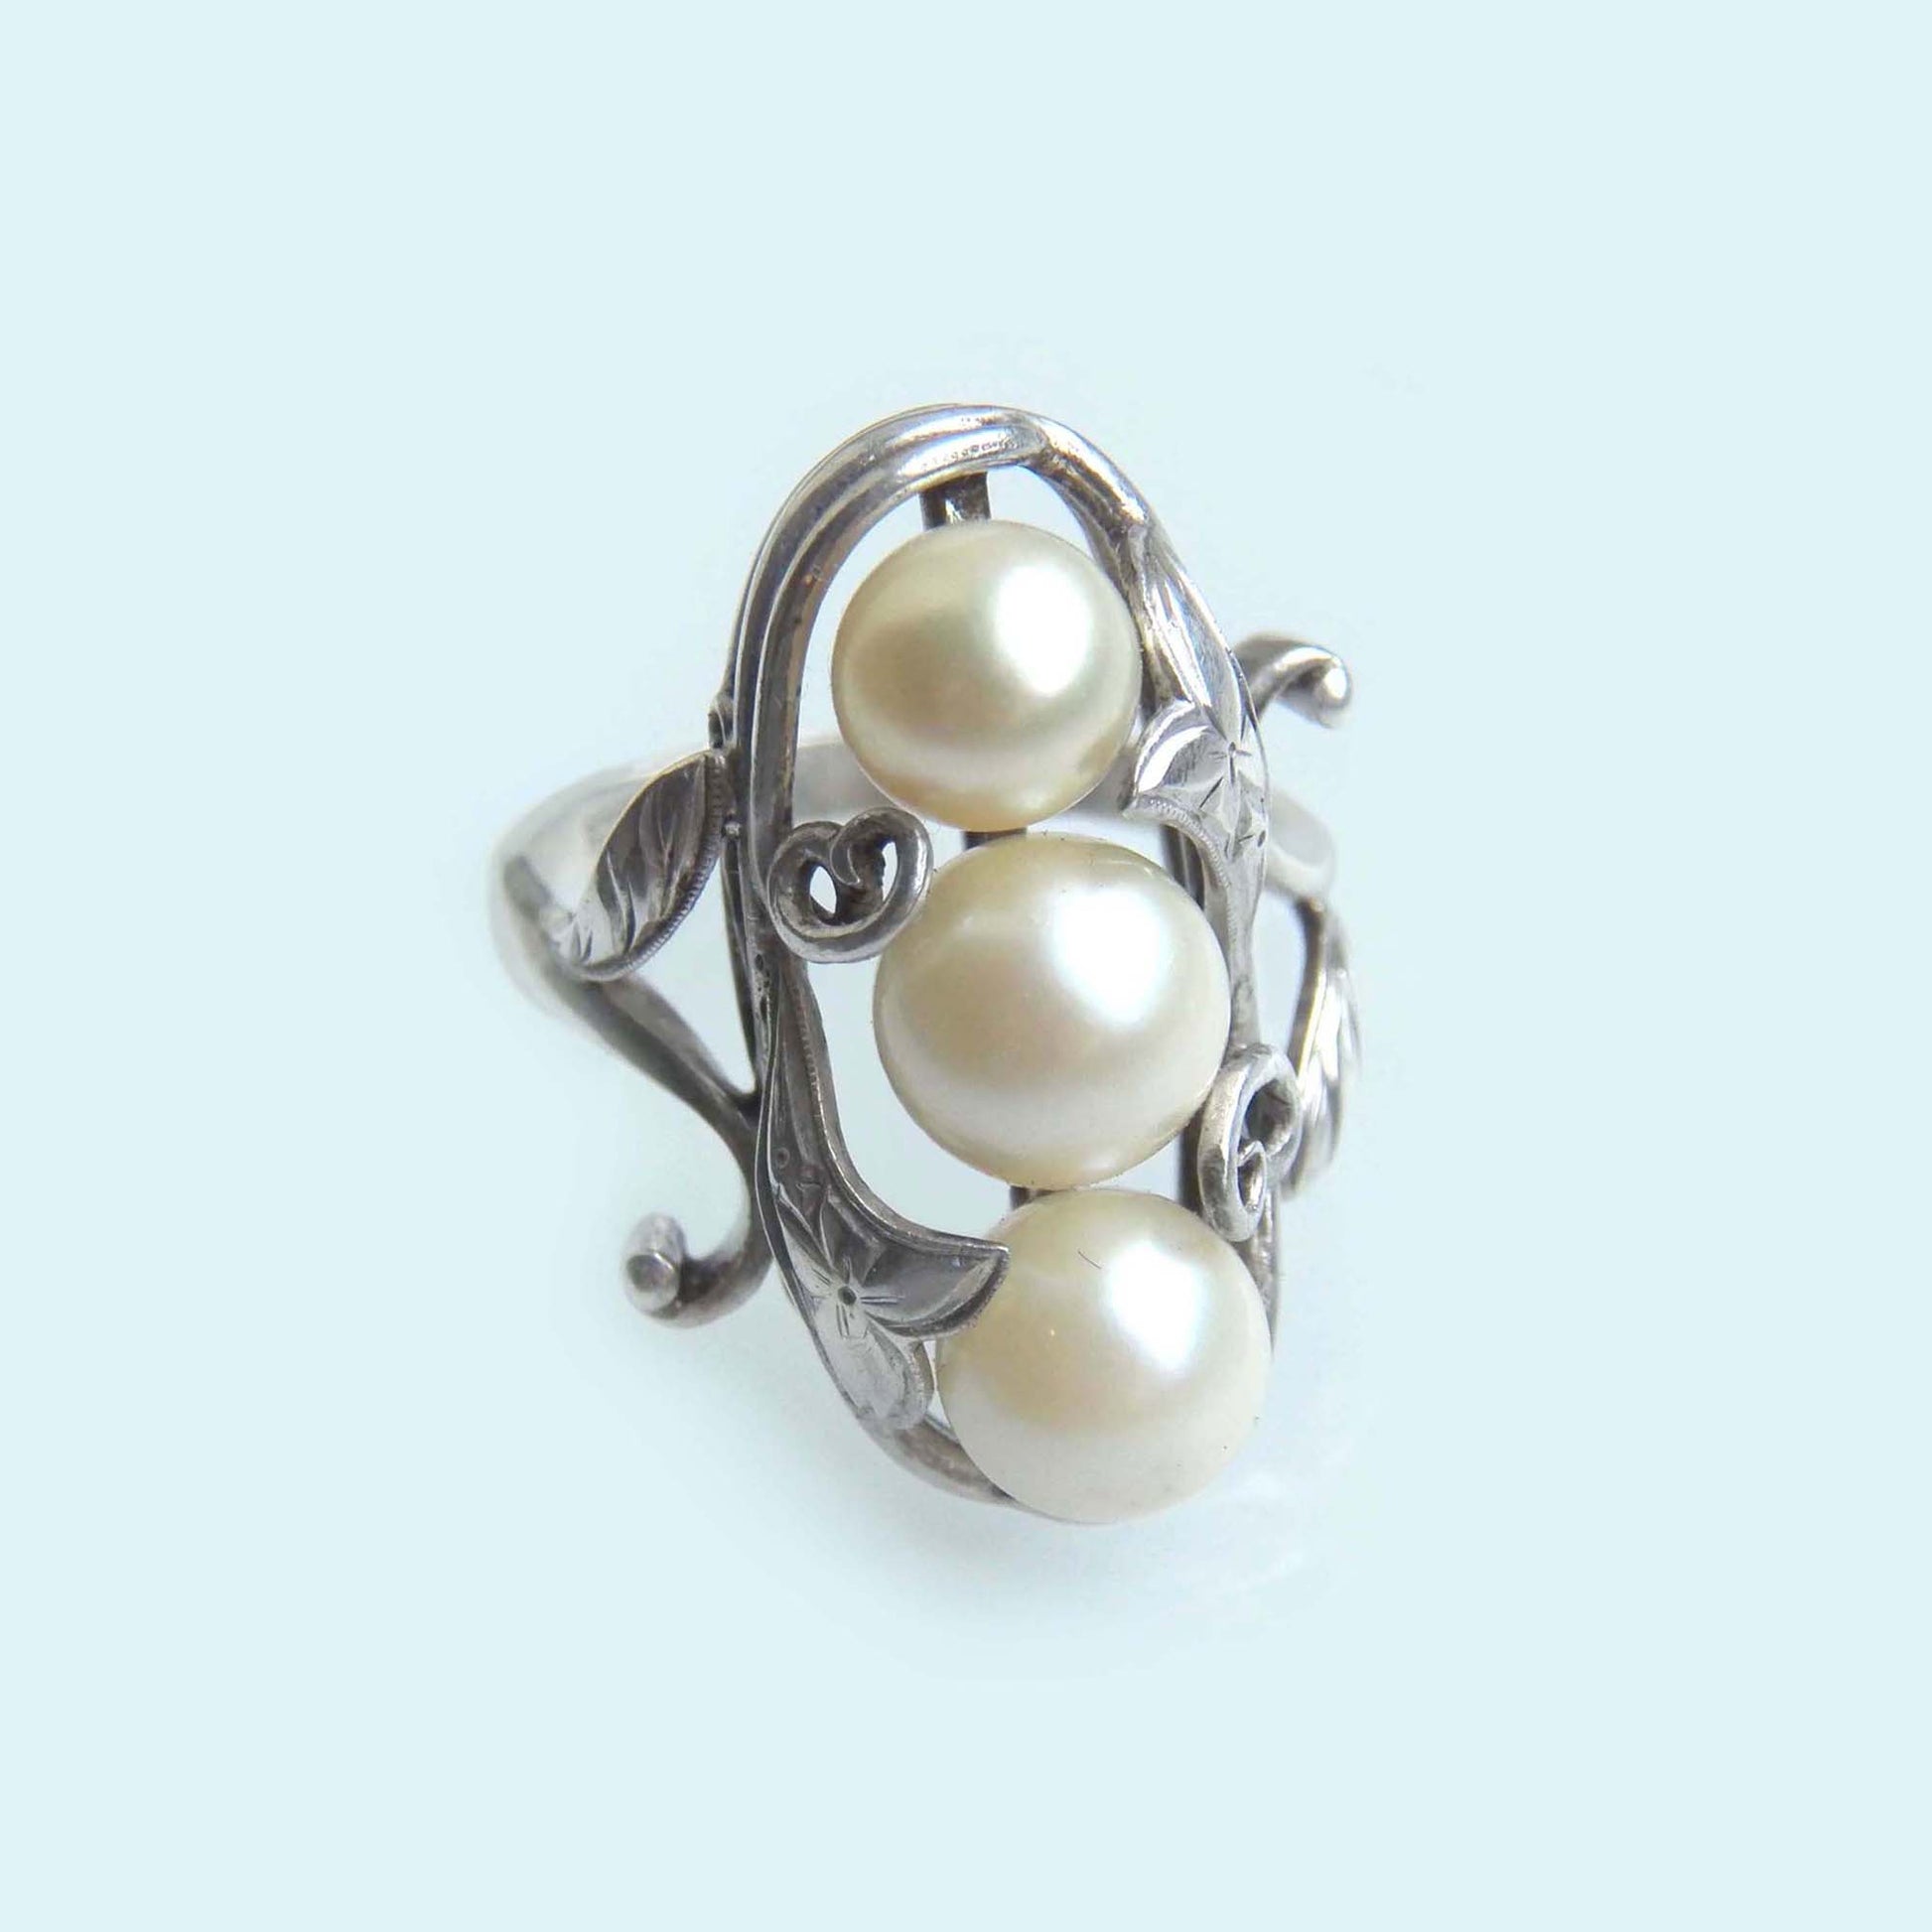  Antique Akoya Pearl Ring in Sterling Silver 1920s 